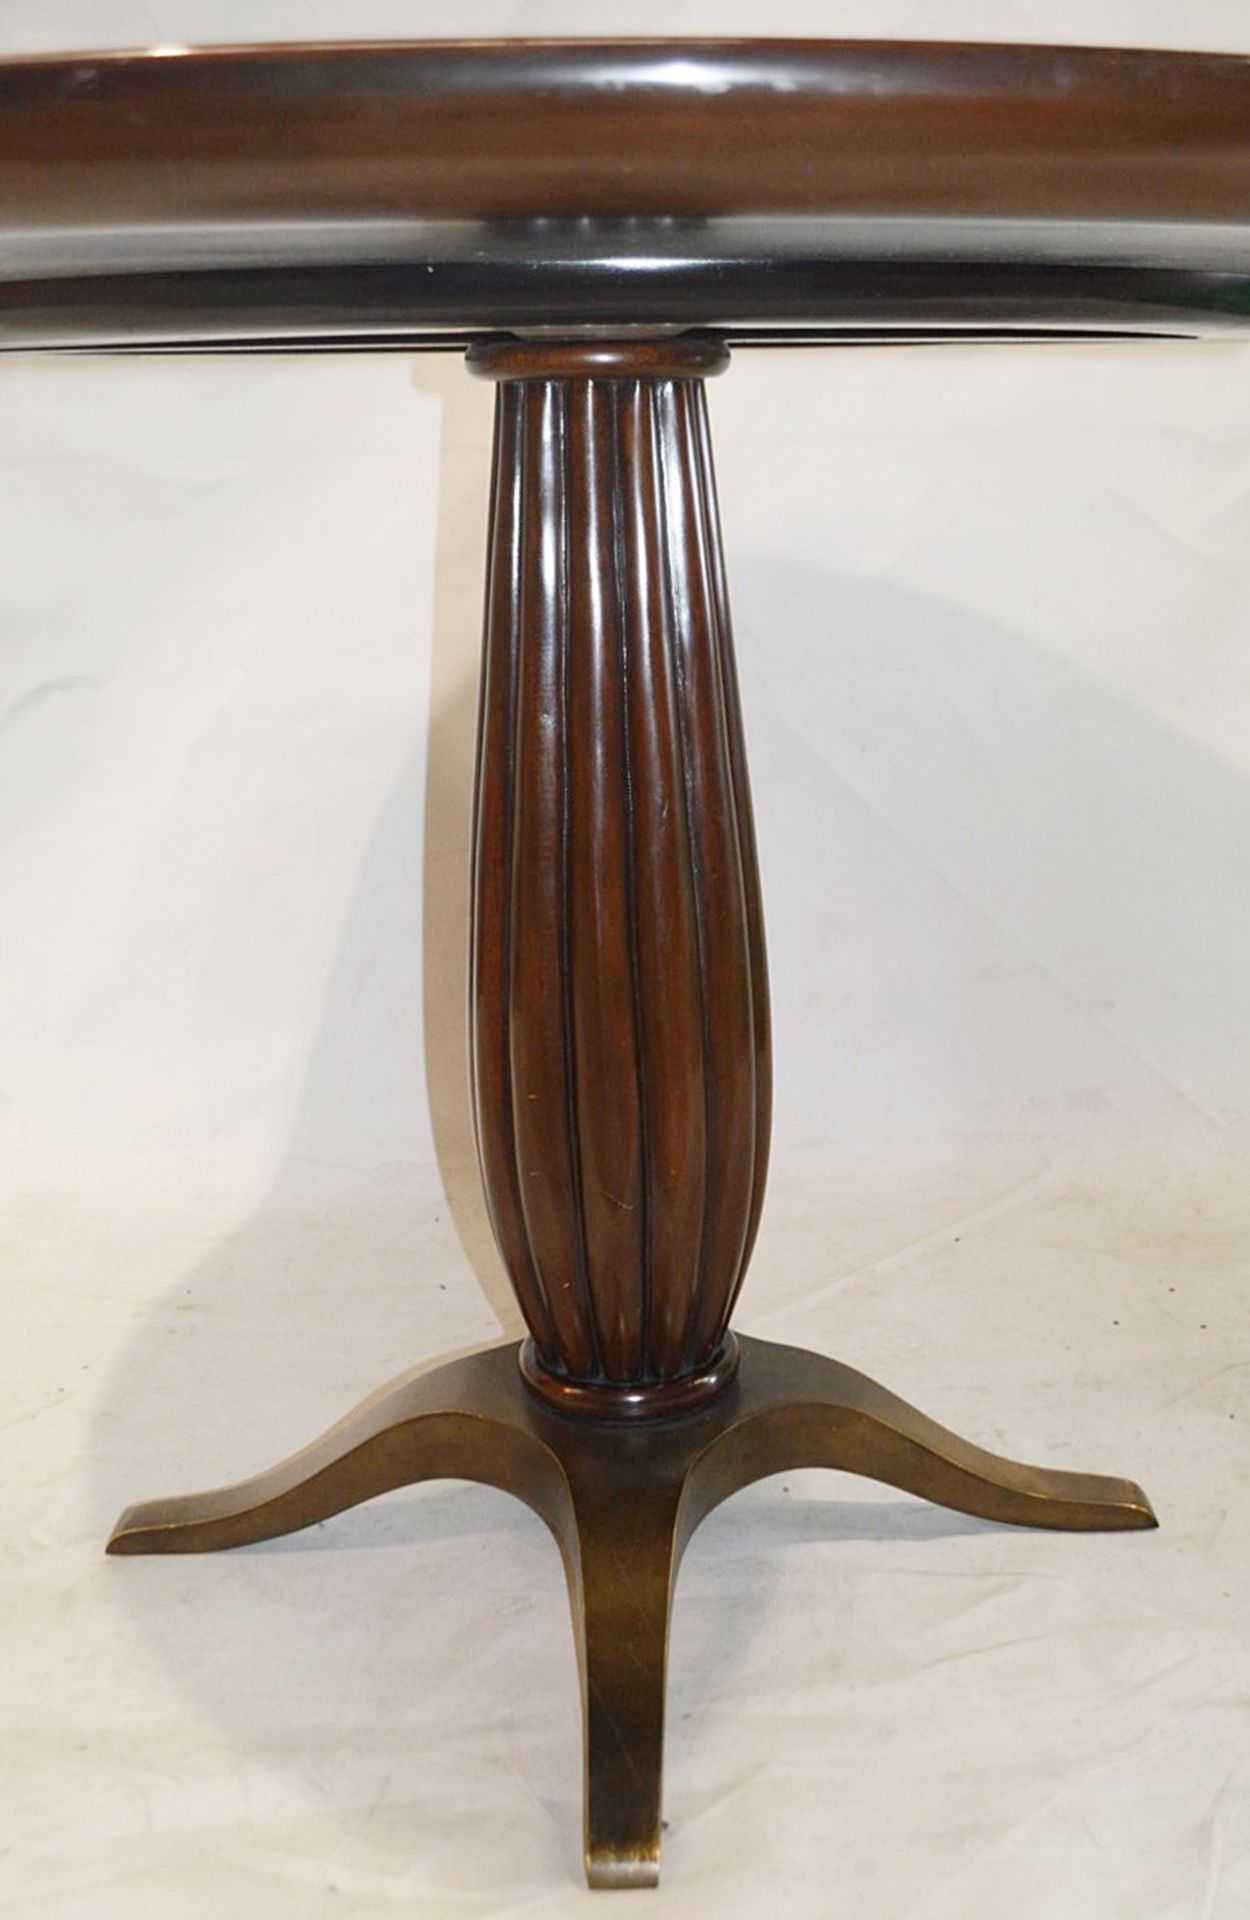 1 x Christopher Guy 'Toulouse' Round Georgian-Style Restaurant Dining Table - Original RRP £4,600.00 - Image 3 of 9